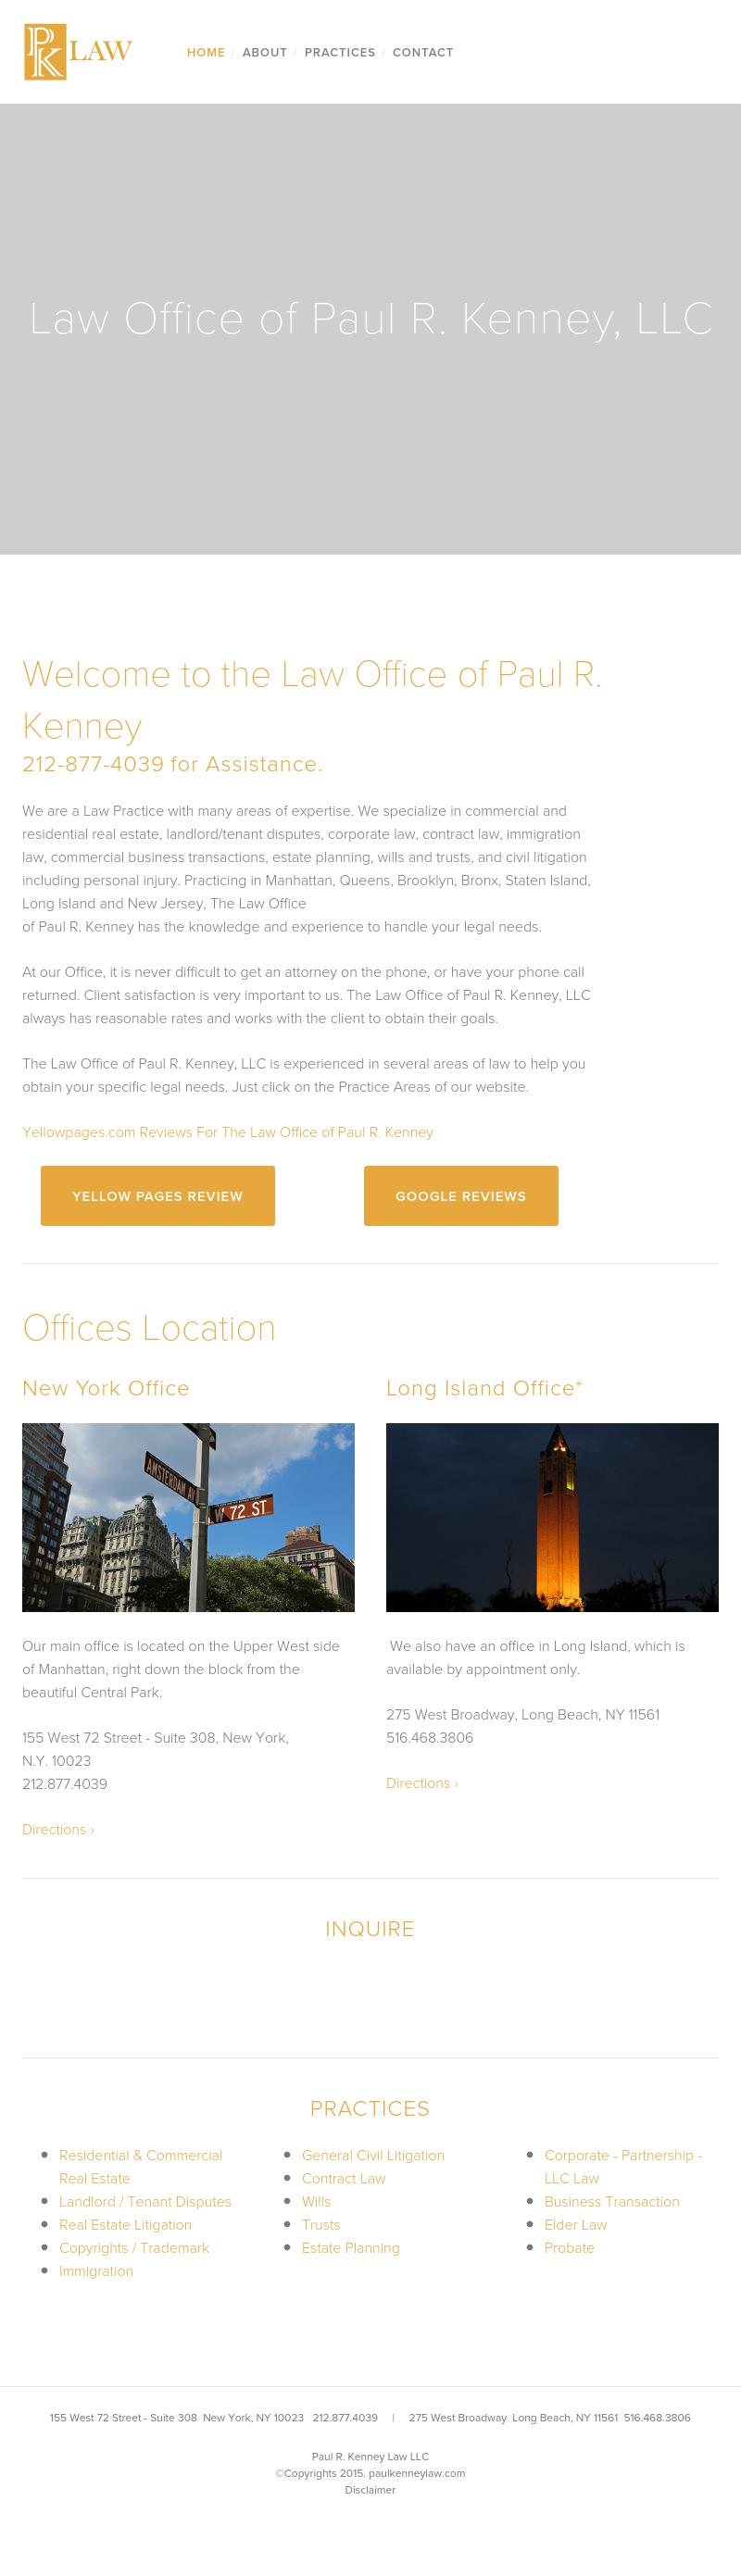 Law Office of Paul R. Kenney - New York NY Lawyers